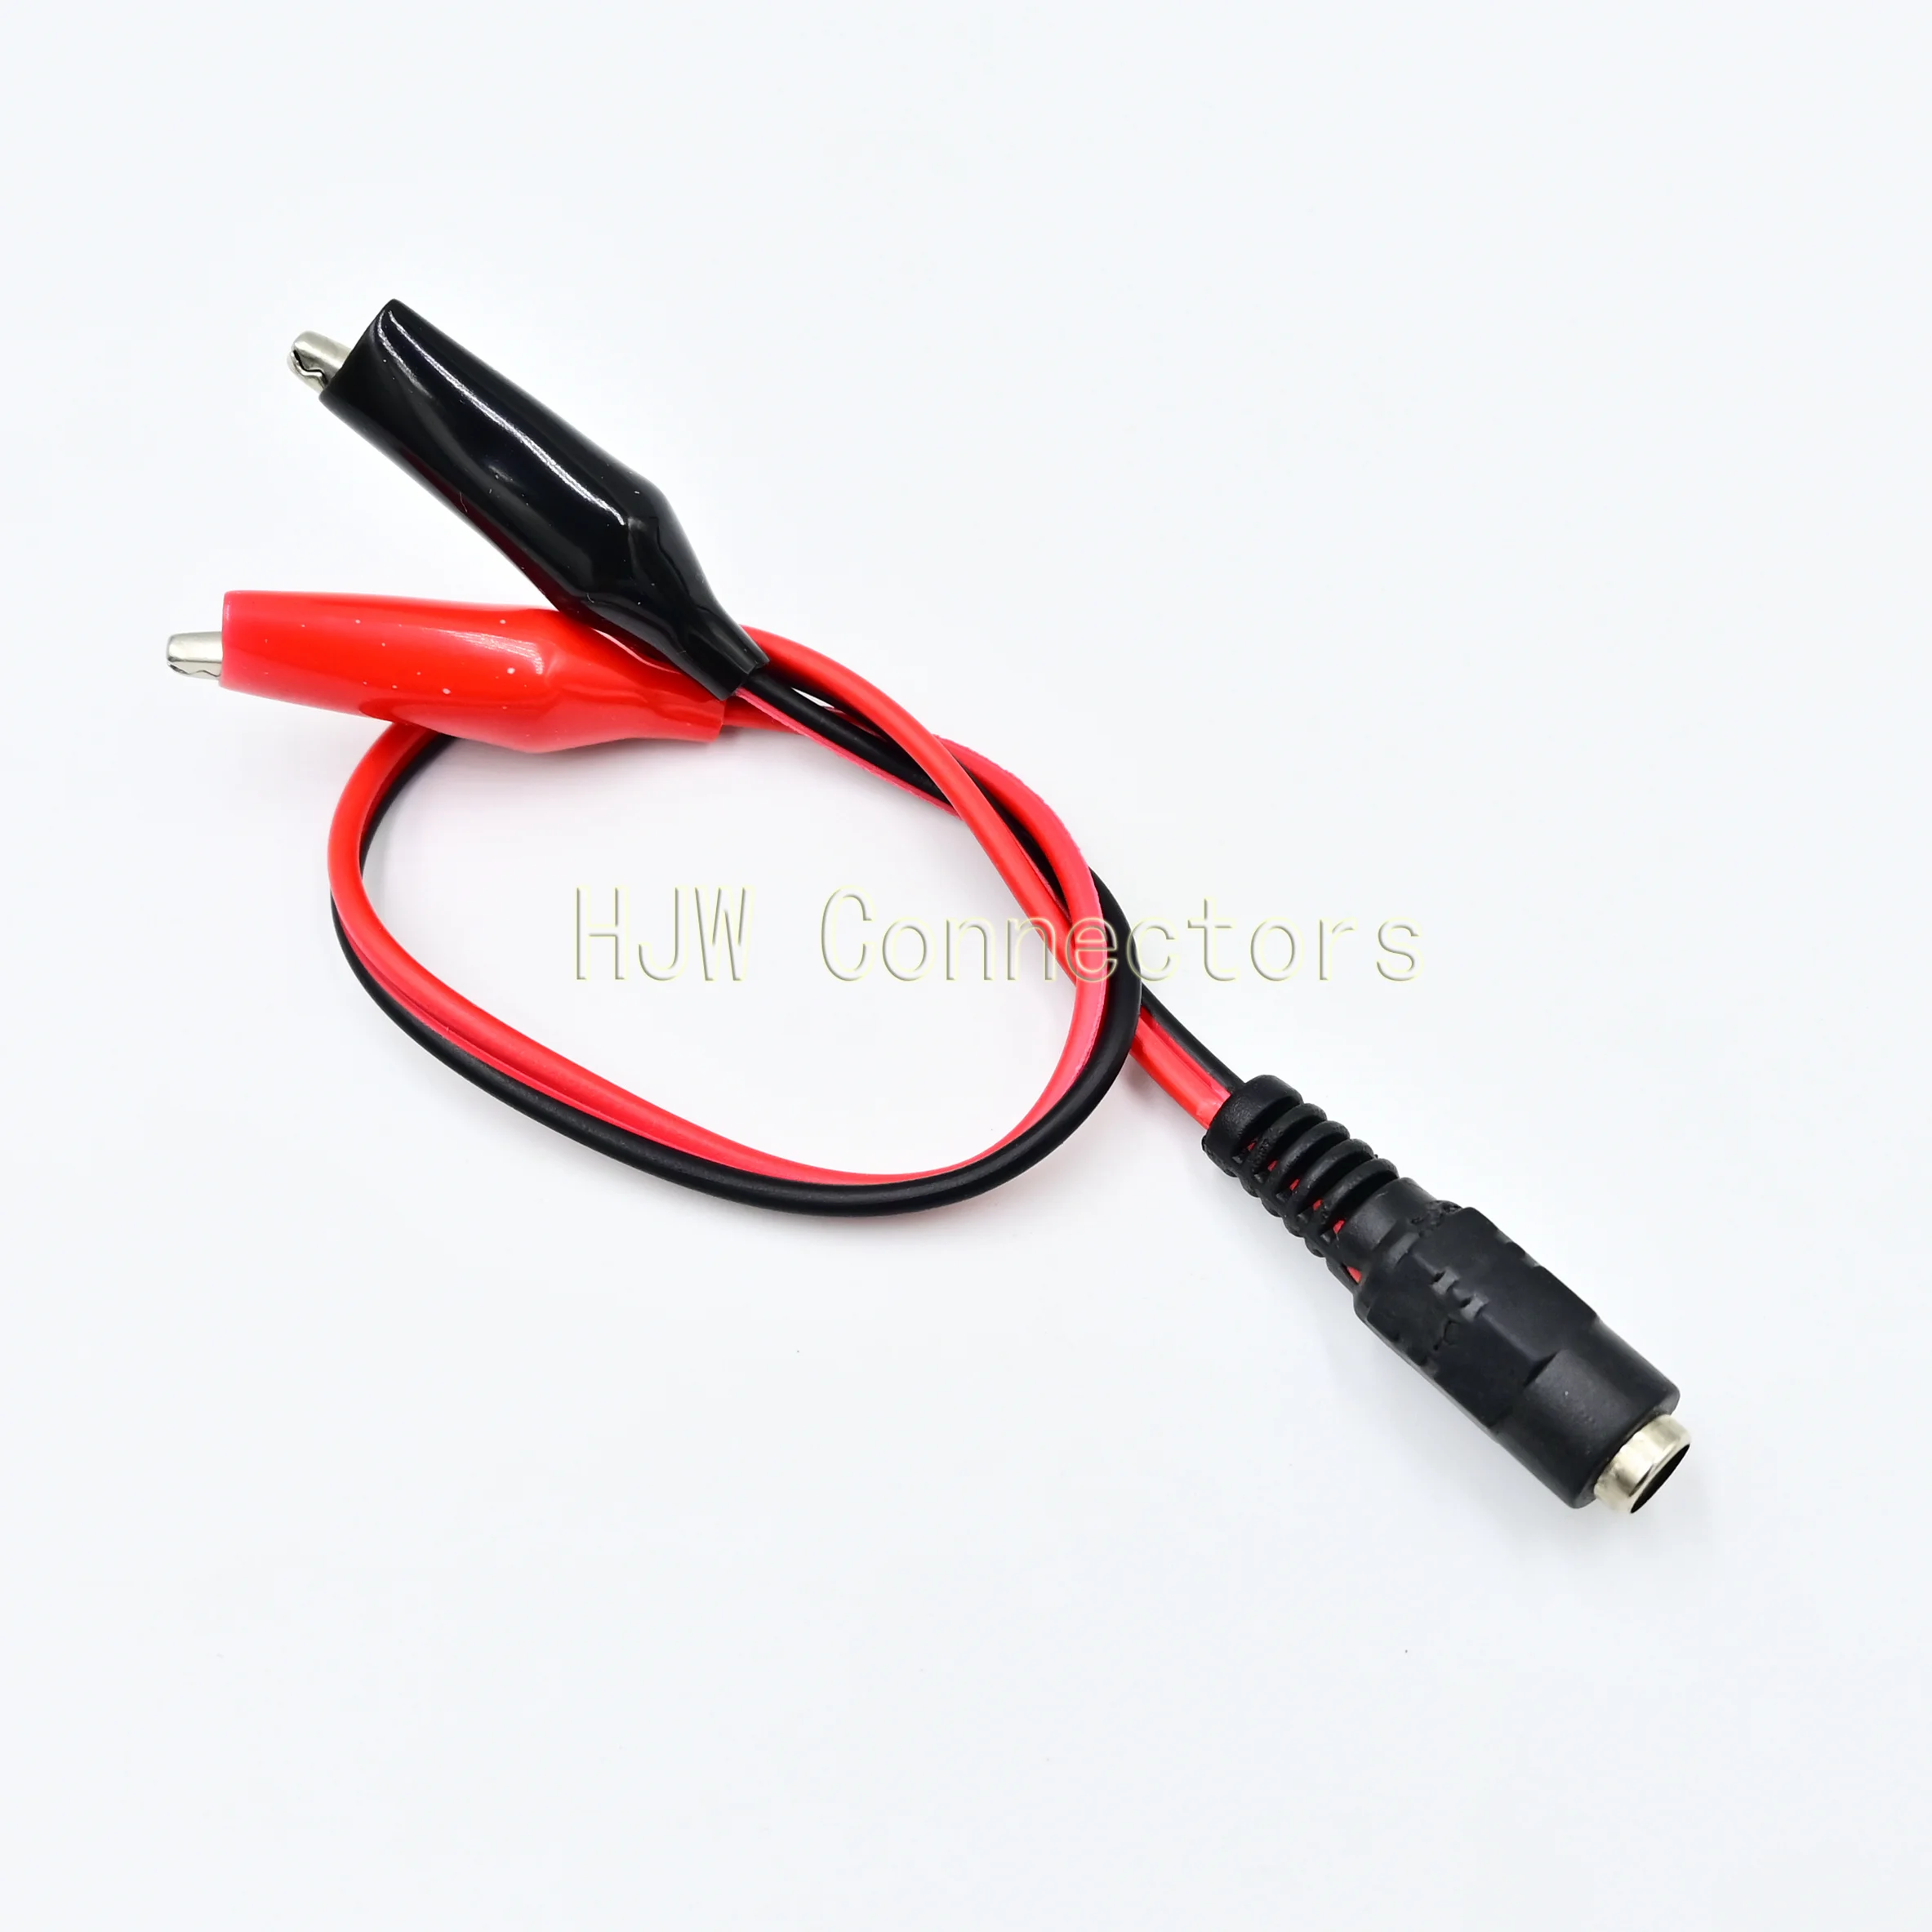 

5.5mm x 2.1mm DC Male Female Cable Connector 5.5*2.1mm DC Power Plug Jack to Dual Alligator Clips Test Lead Crocodile Clamp Wire